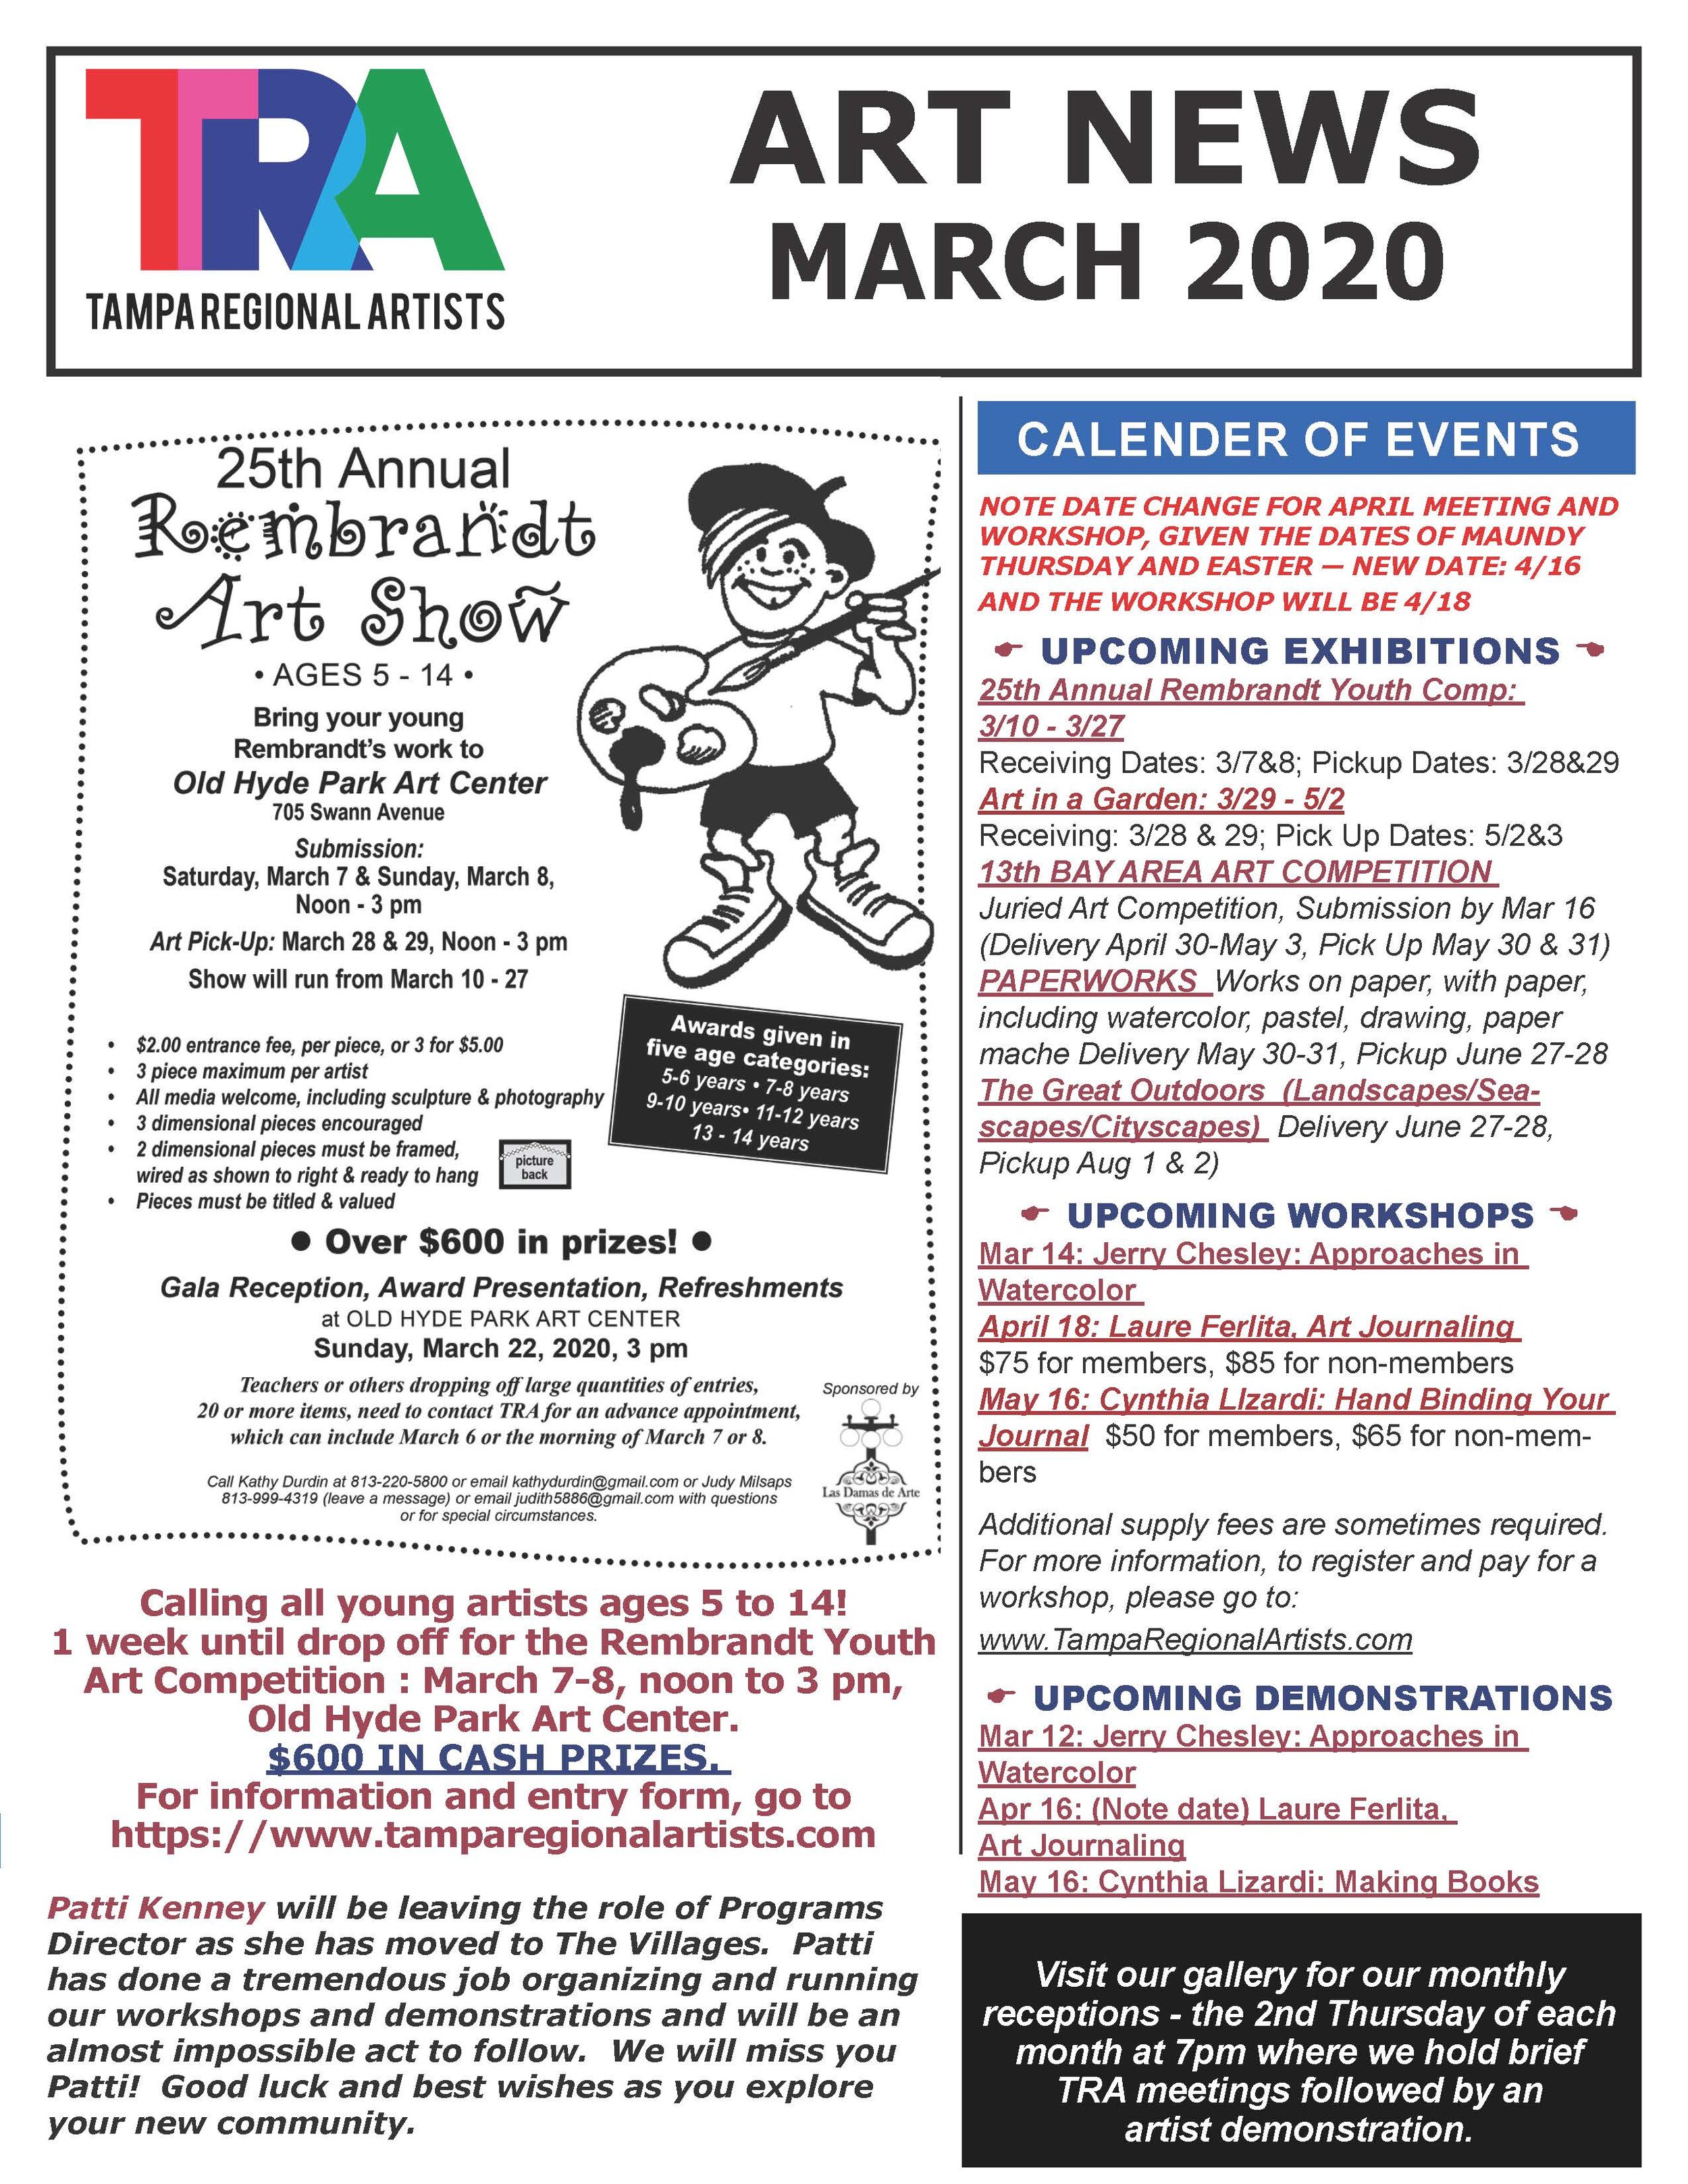 Page 2 - March 2020